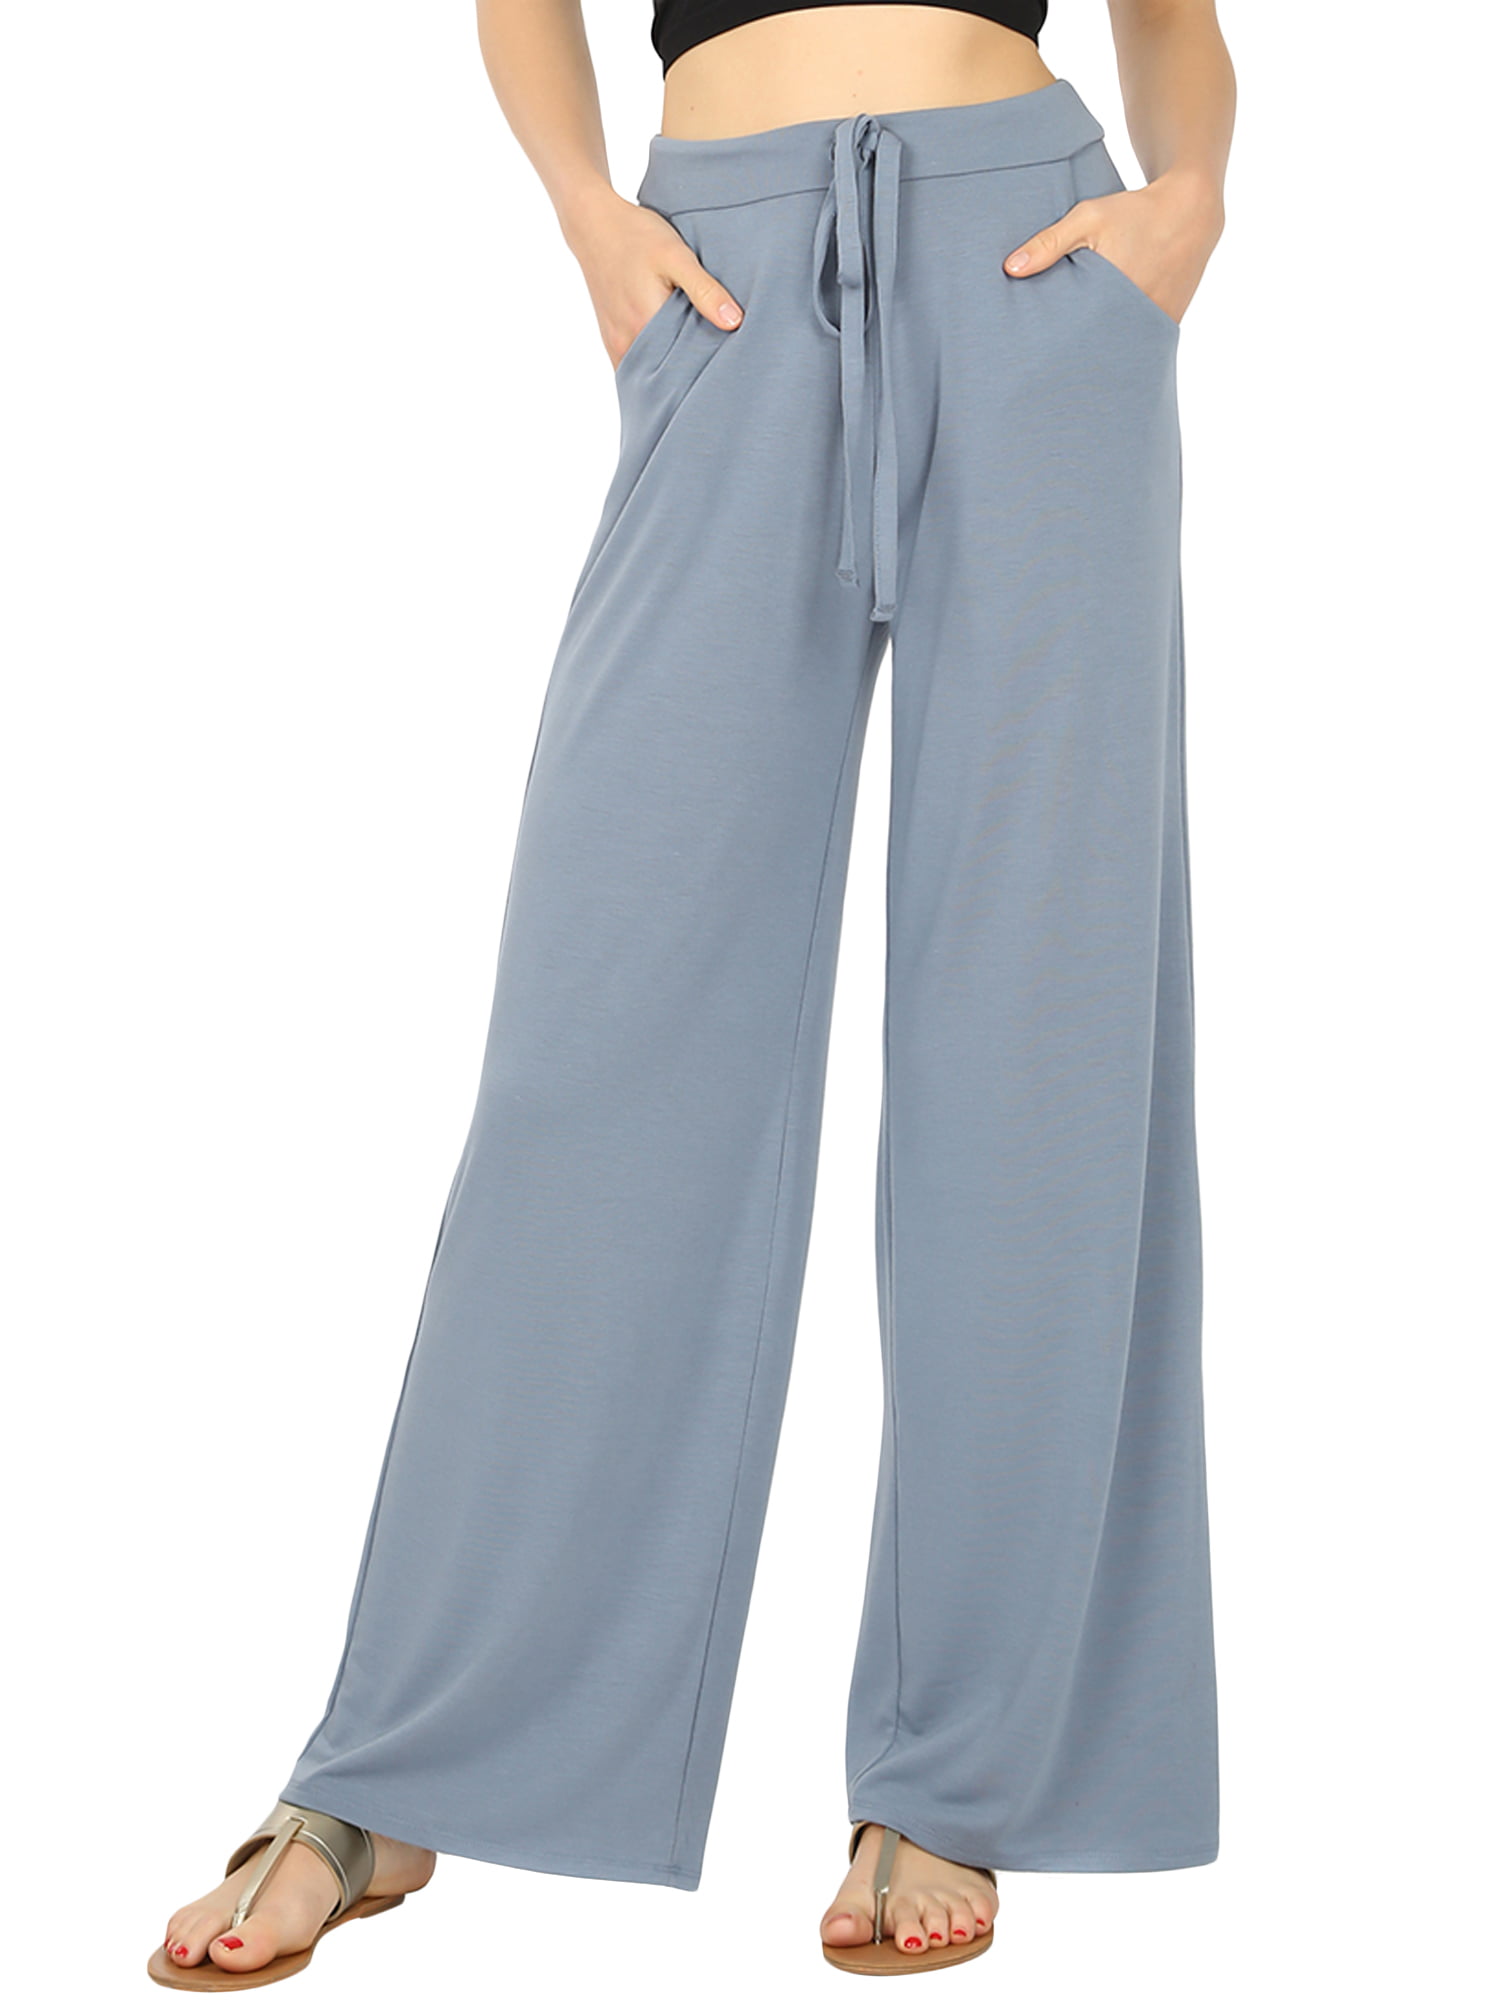 ZERDOCEAN Womens Plus Size Wide Leg Casual Lounge Pants Comfy Capris Relaxed Pajama Bottoms Drawstring Pockets 